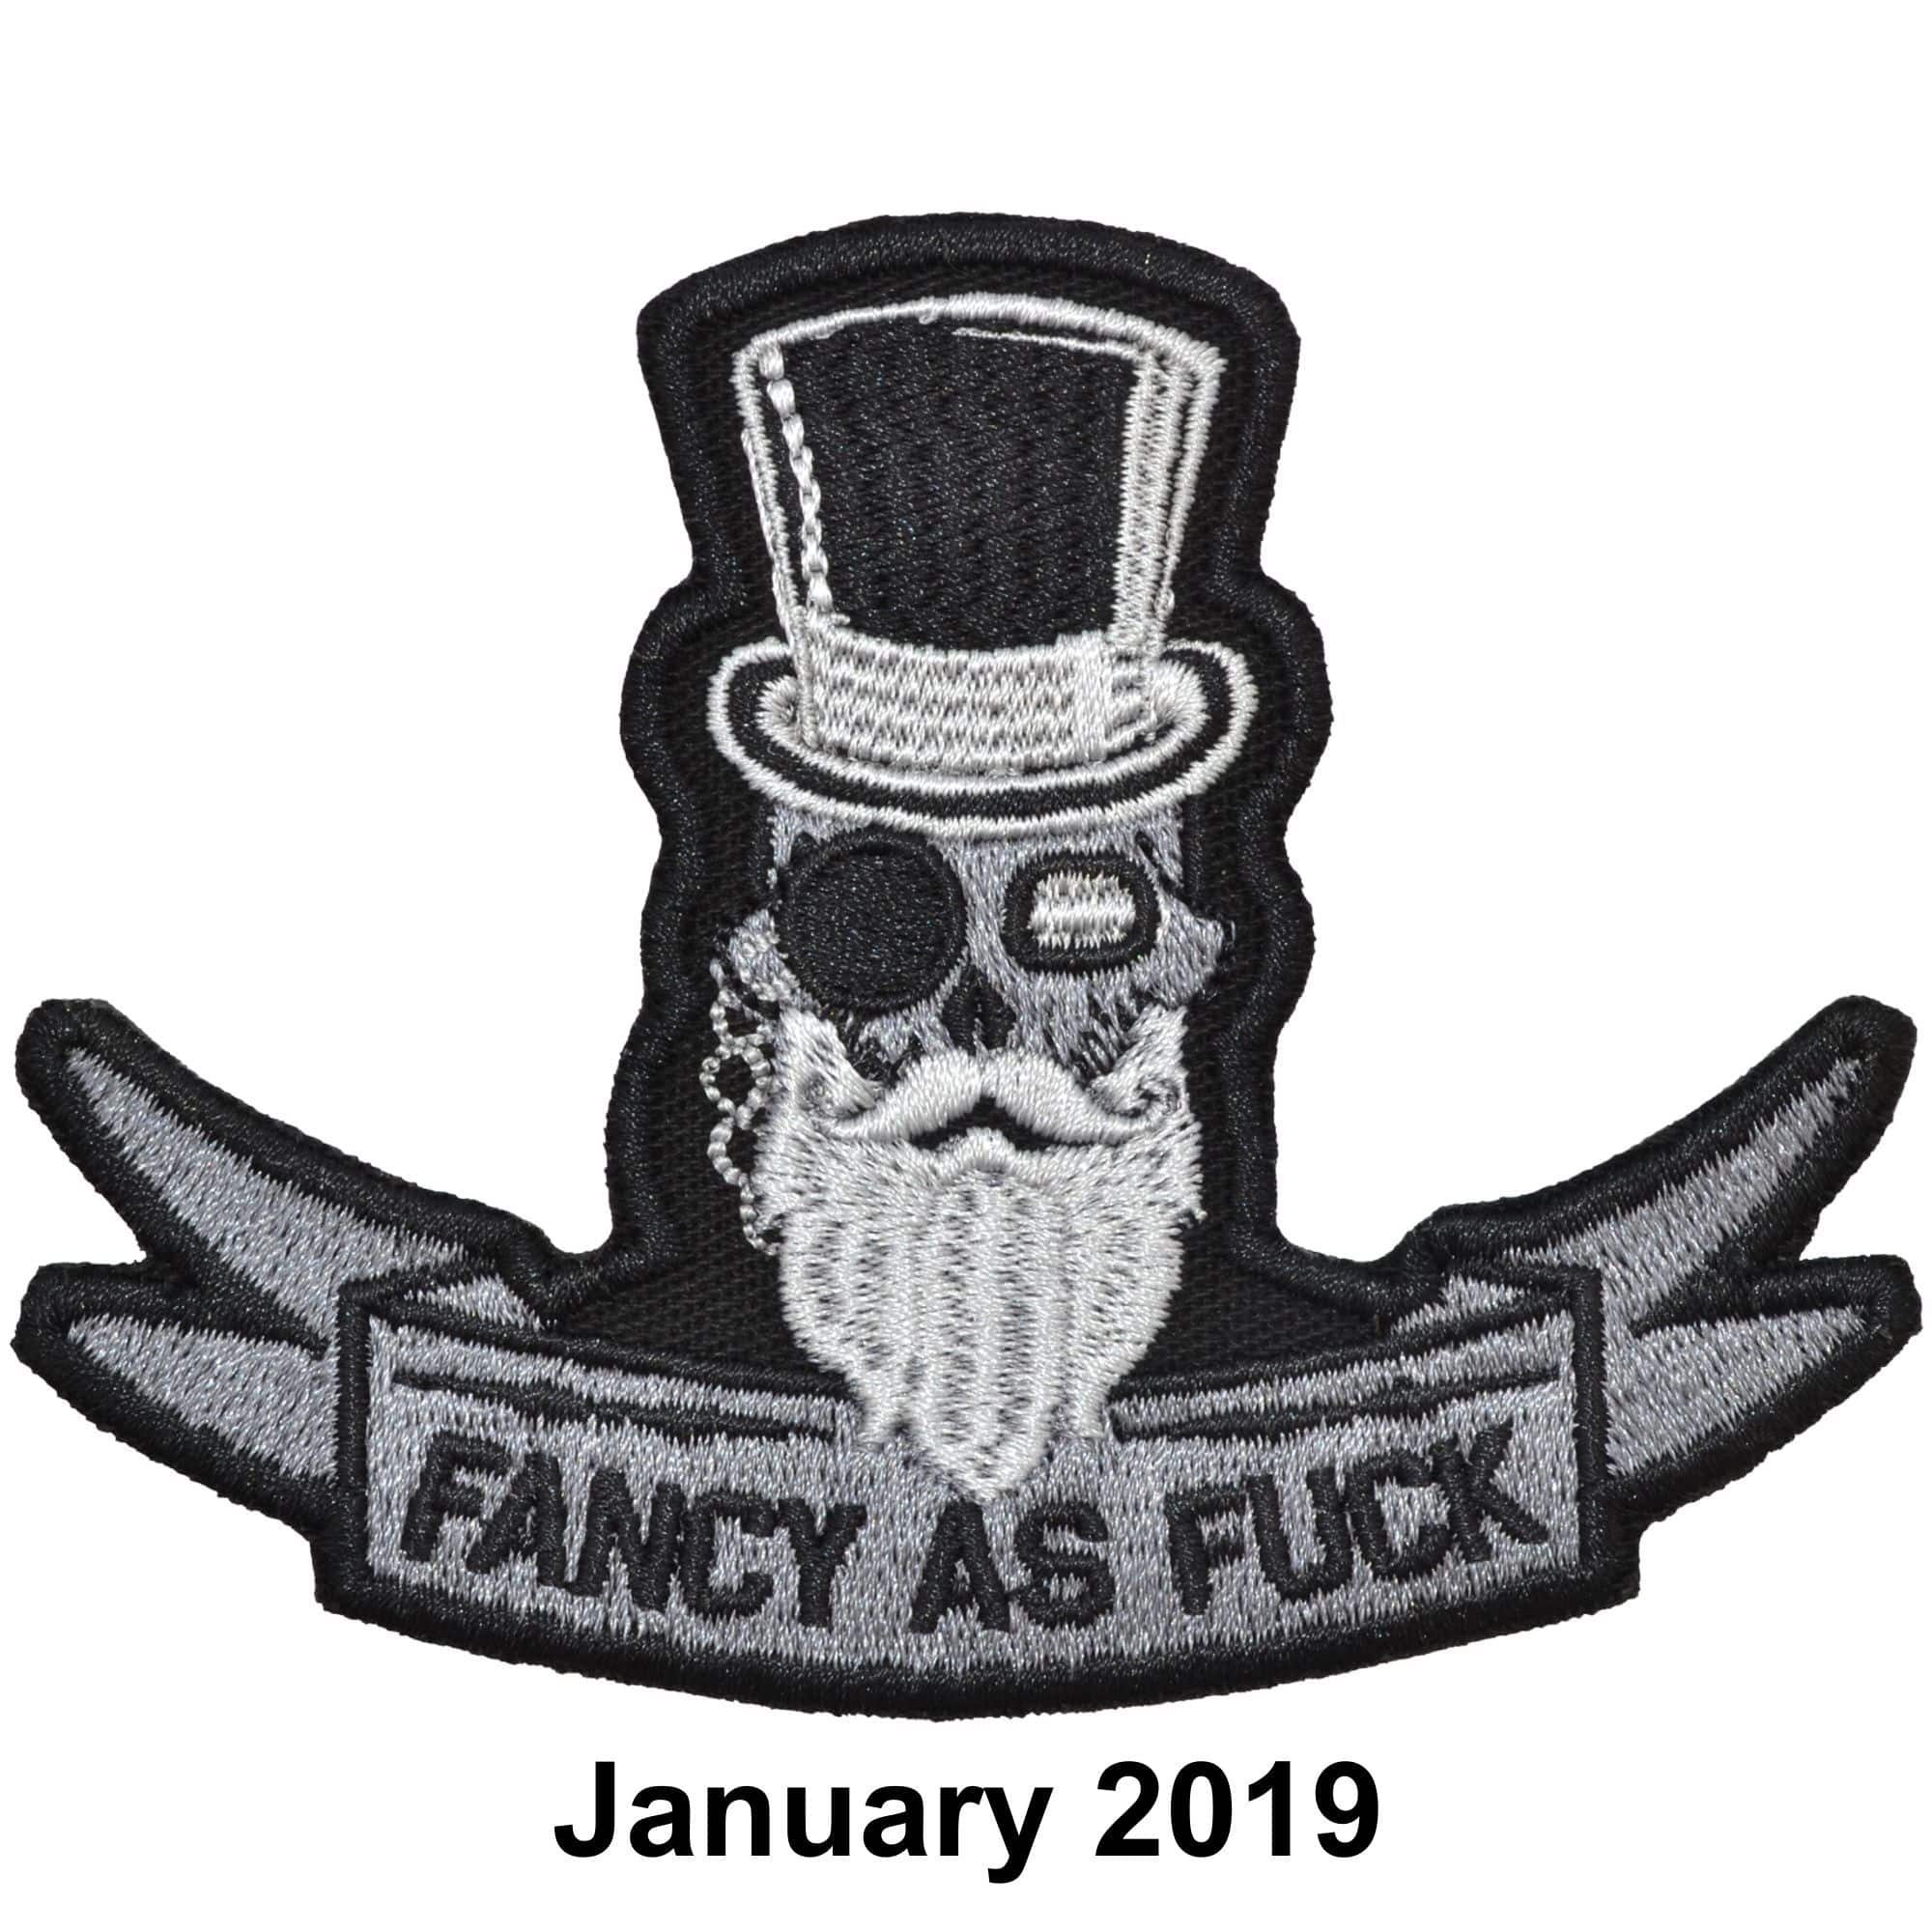 January 2019 Patch of the Month - Fancy AF Skull